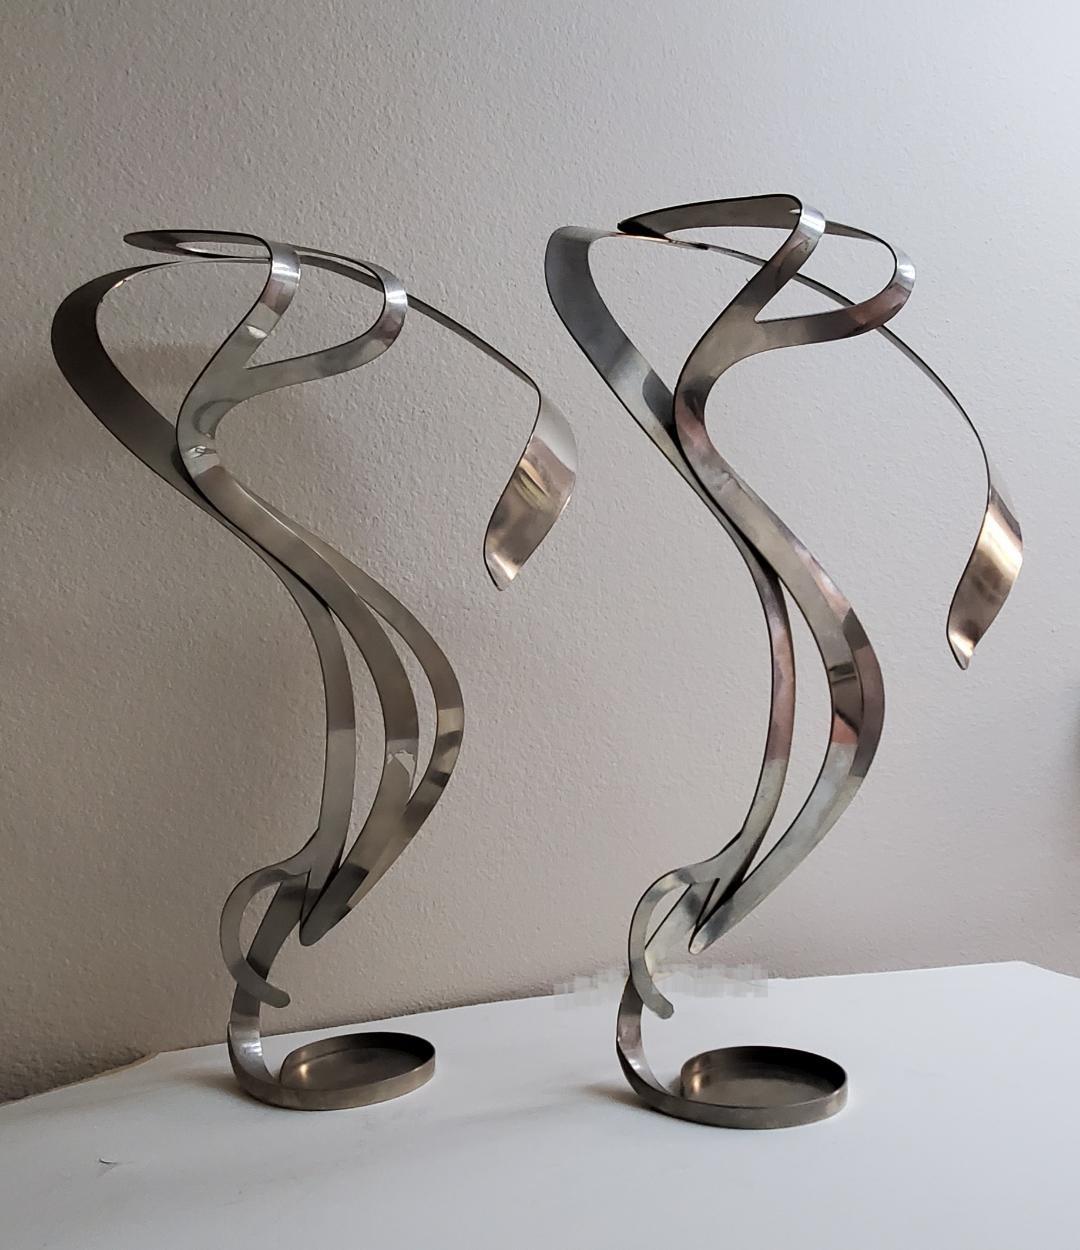 2 Art Nouveau Styled Candle Holders Crafted Into Swirling Twirling Metal Smoke  For Sale 2